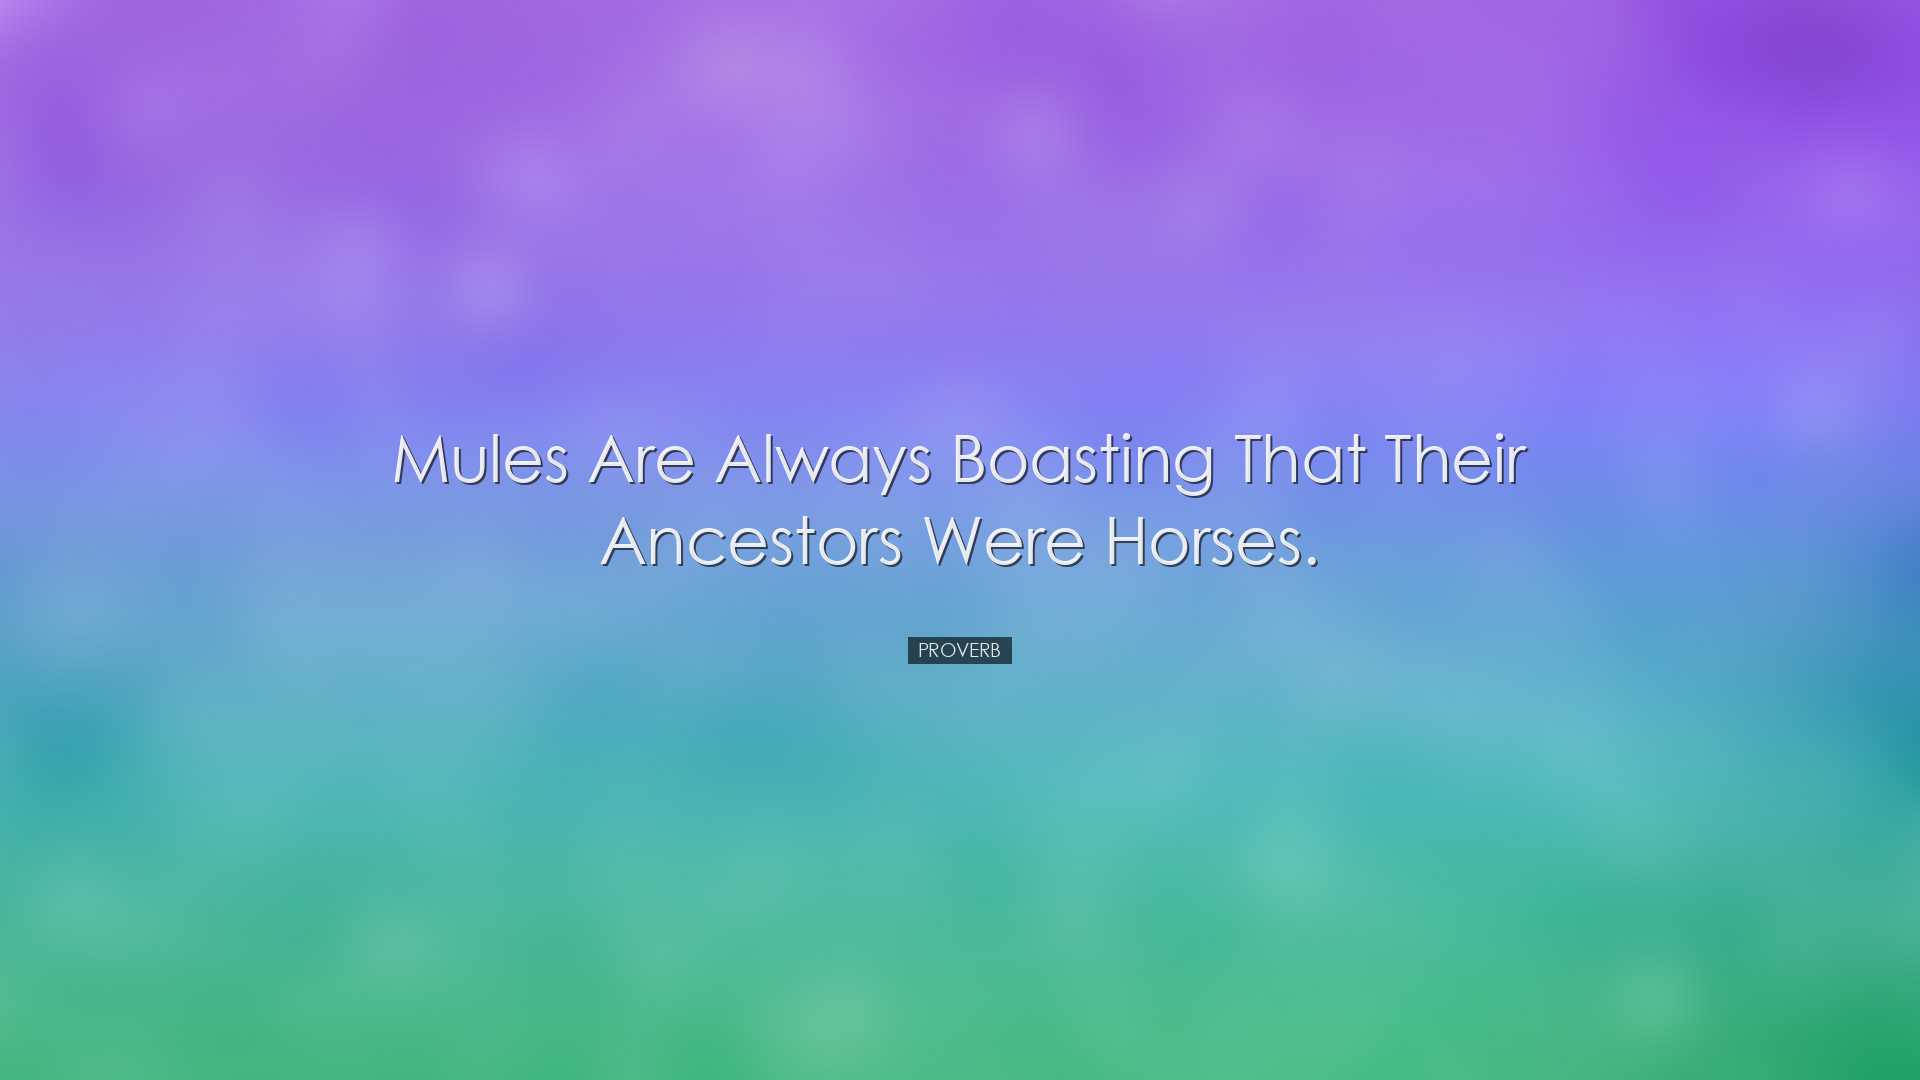 Mules are always boasting that their ancestors were horses. - Prov